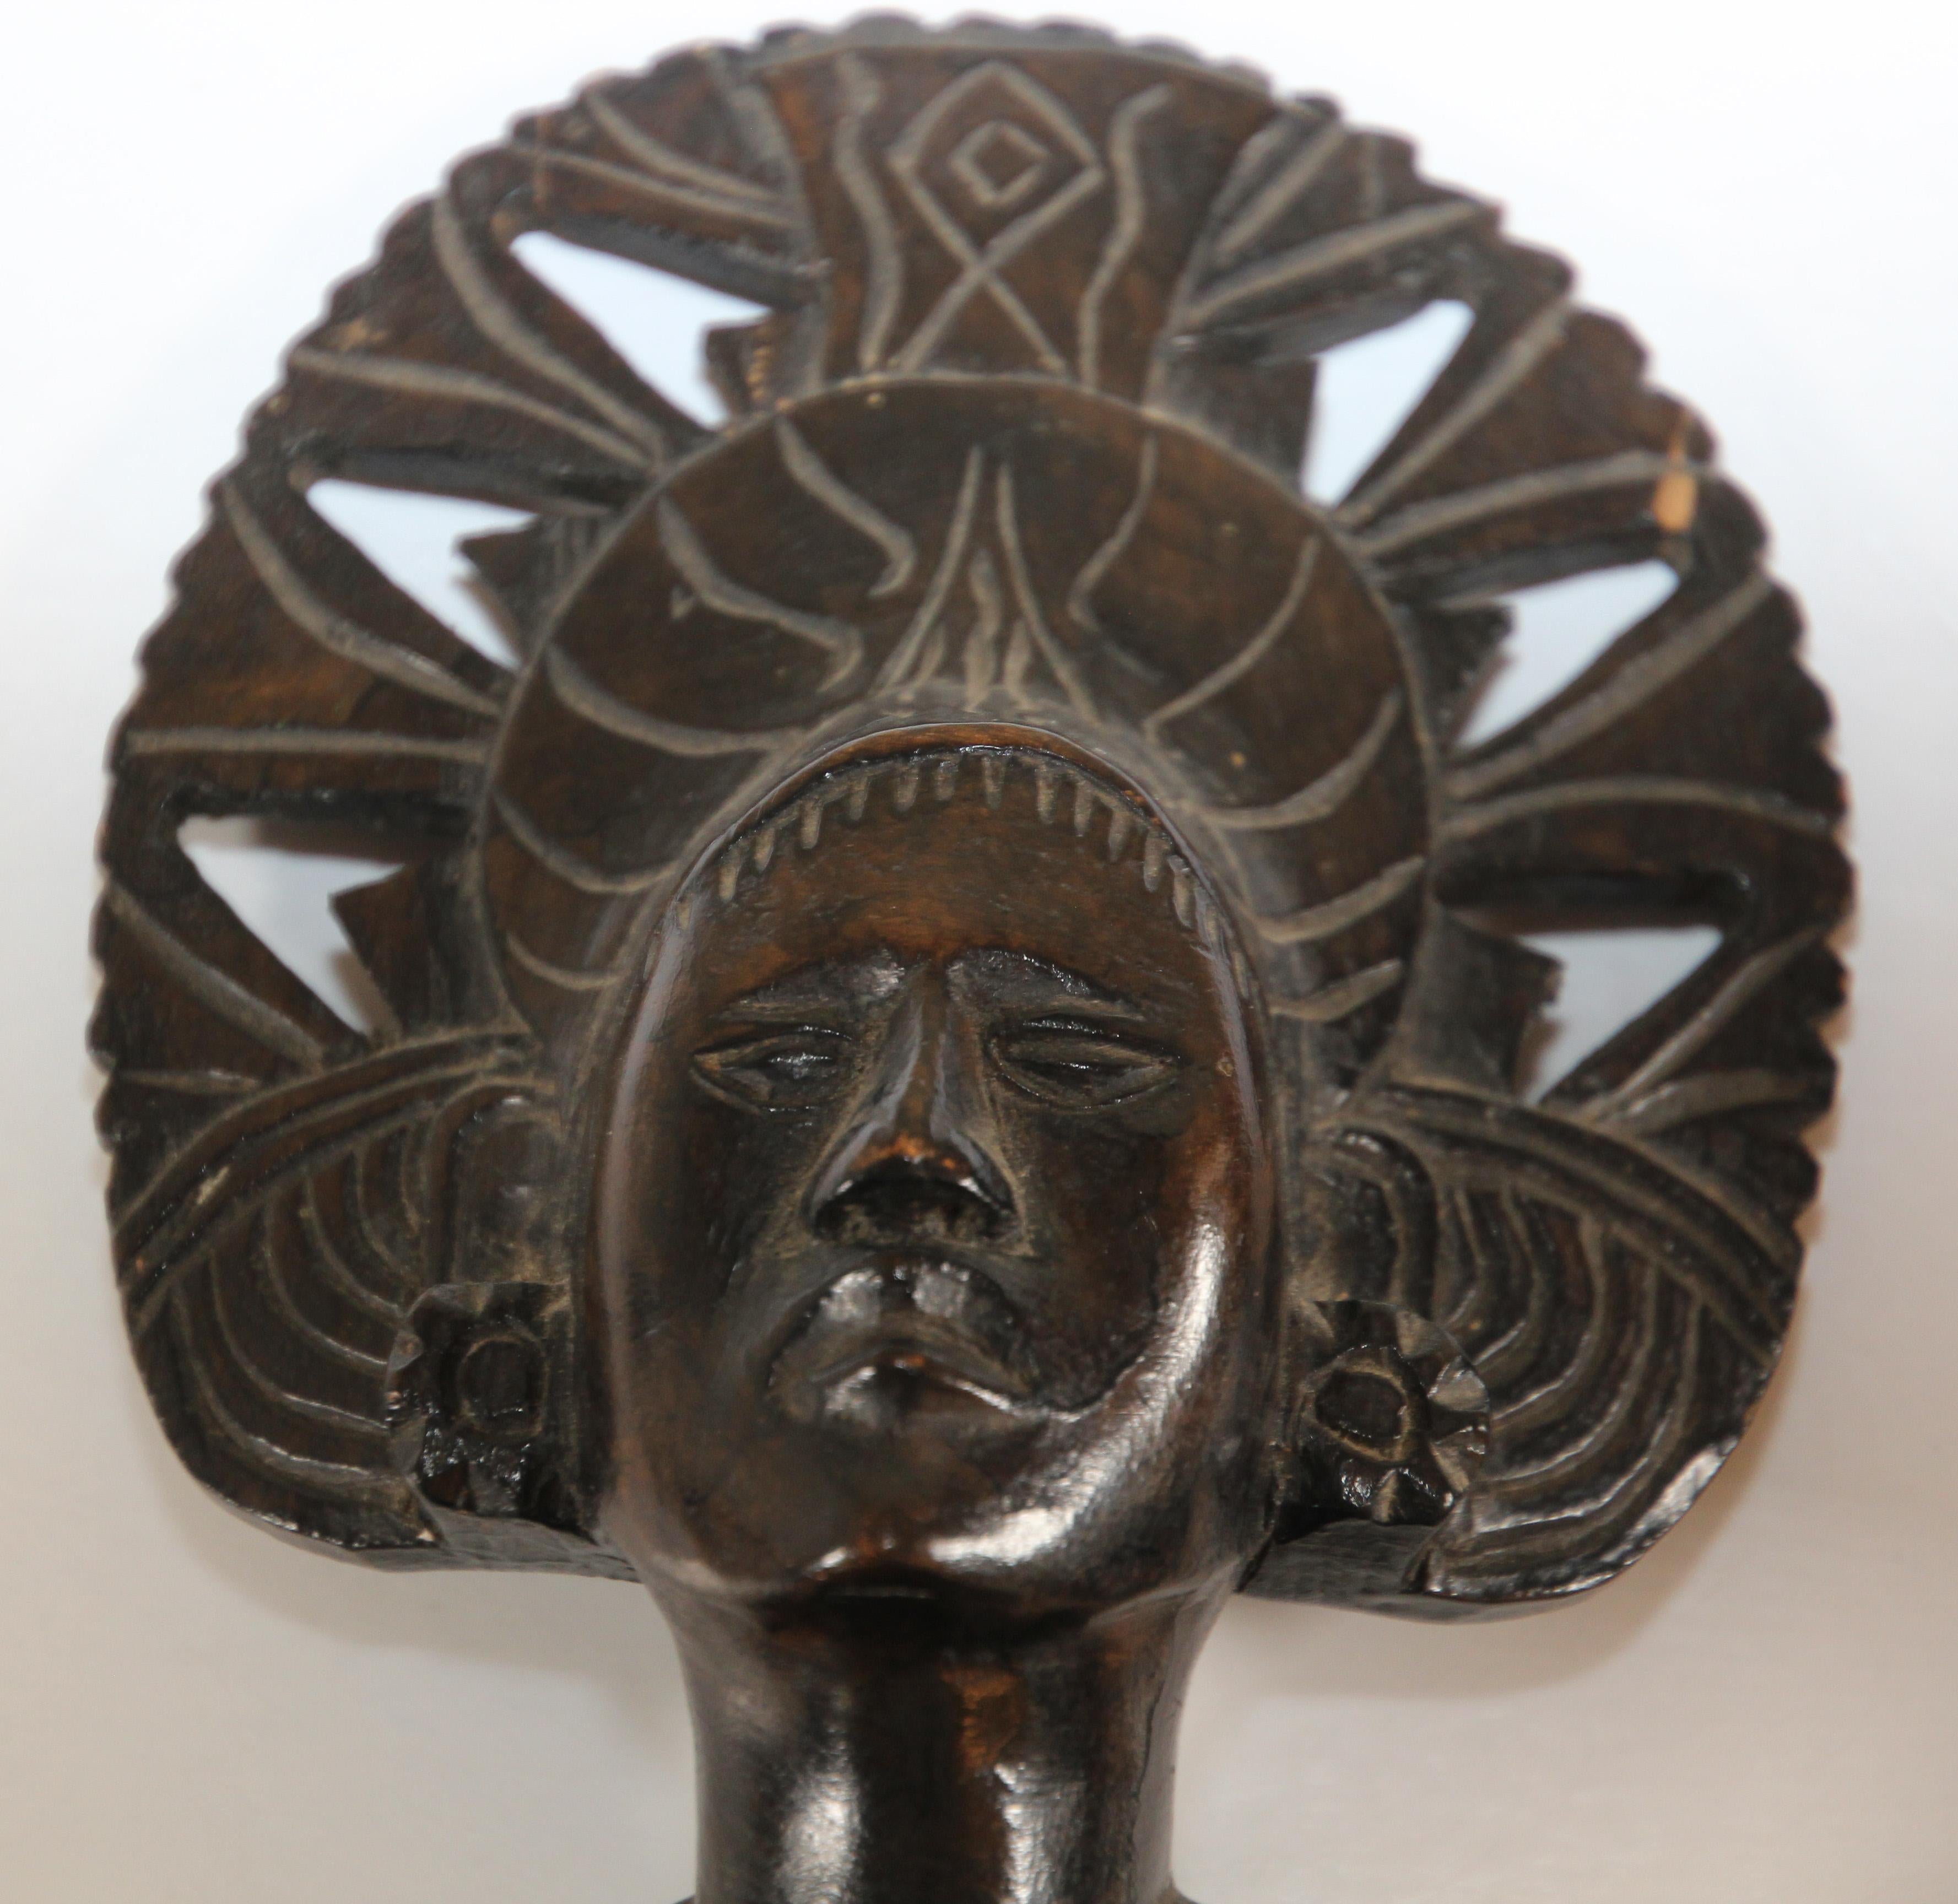 Hand-Carved Hand Carved Wooden Balinese Busts Sculptures For Sale